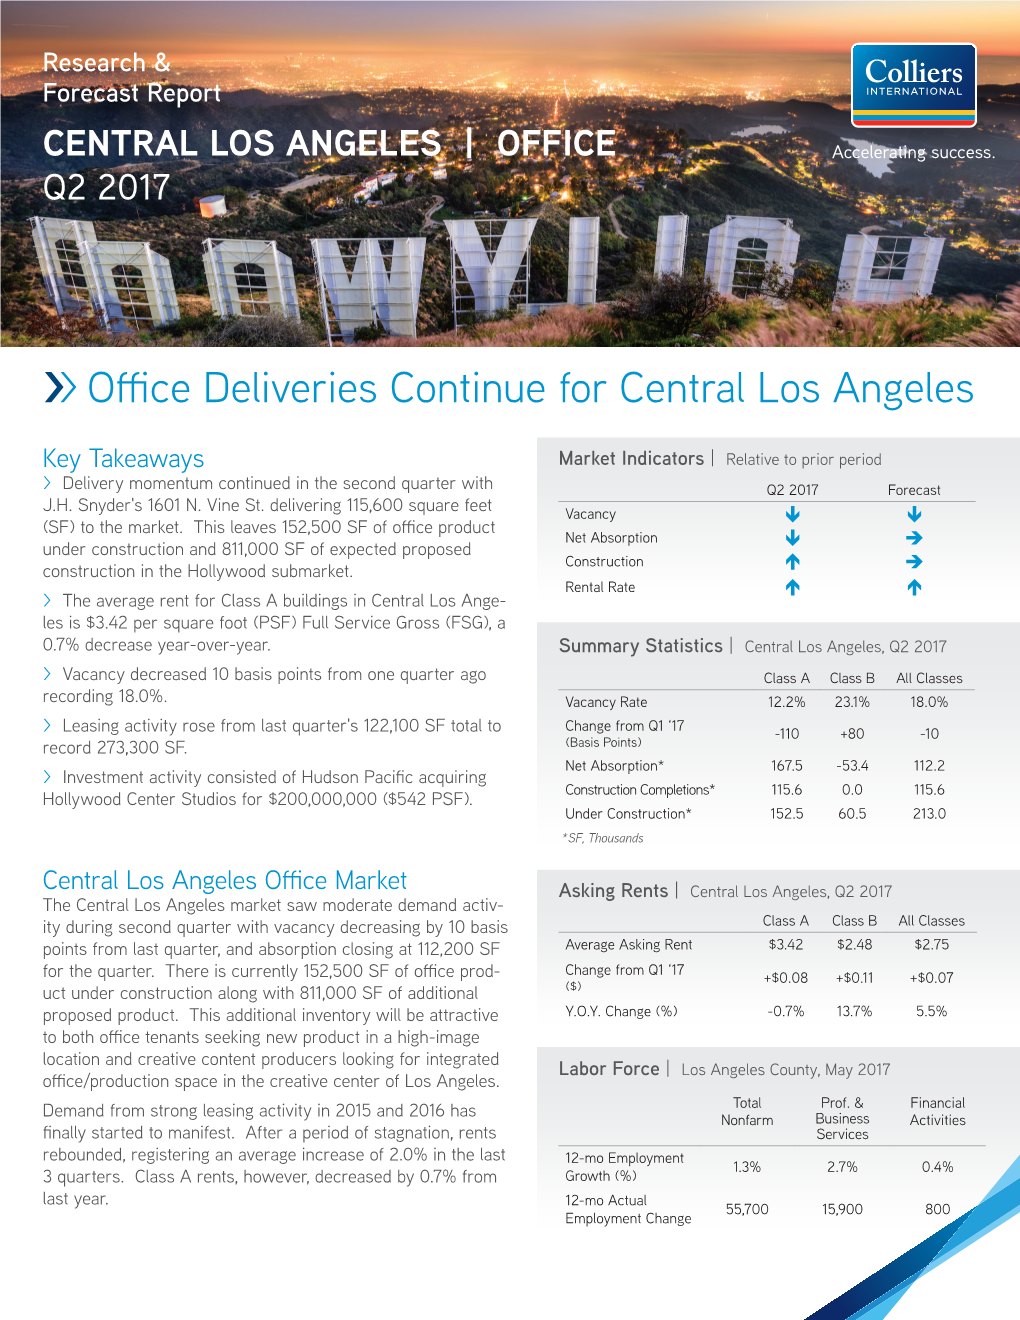 Office Deliveries Continue for Central Los Angeles